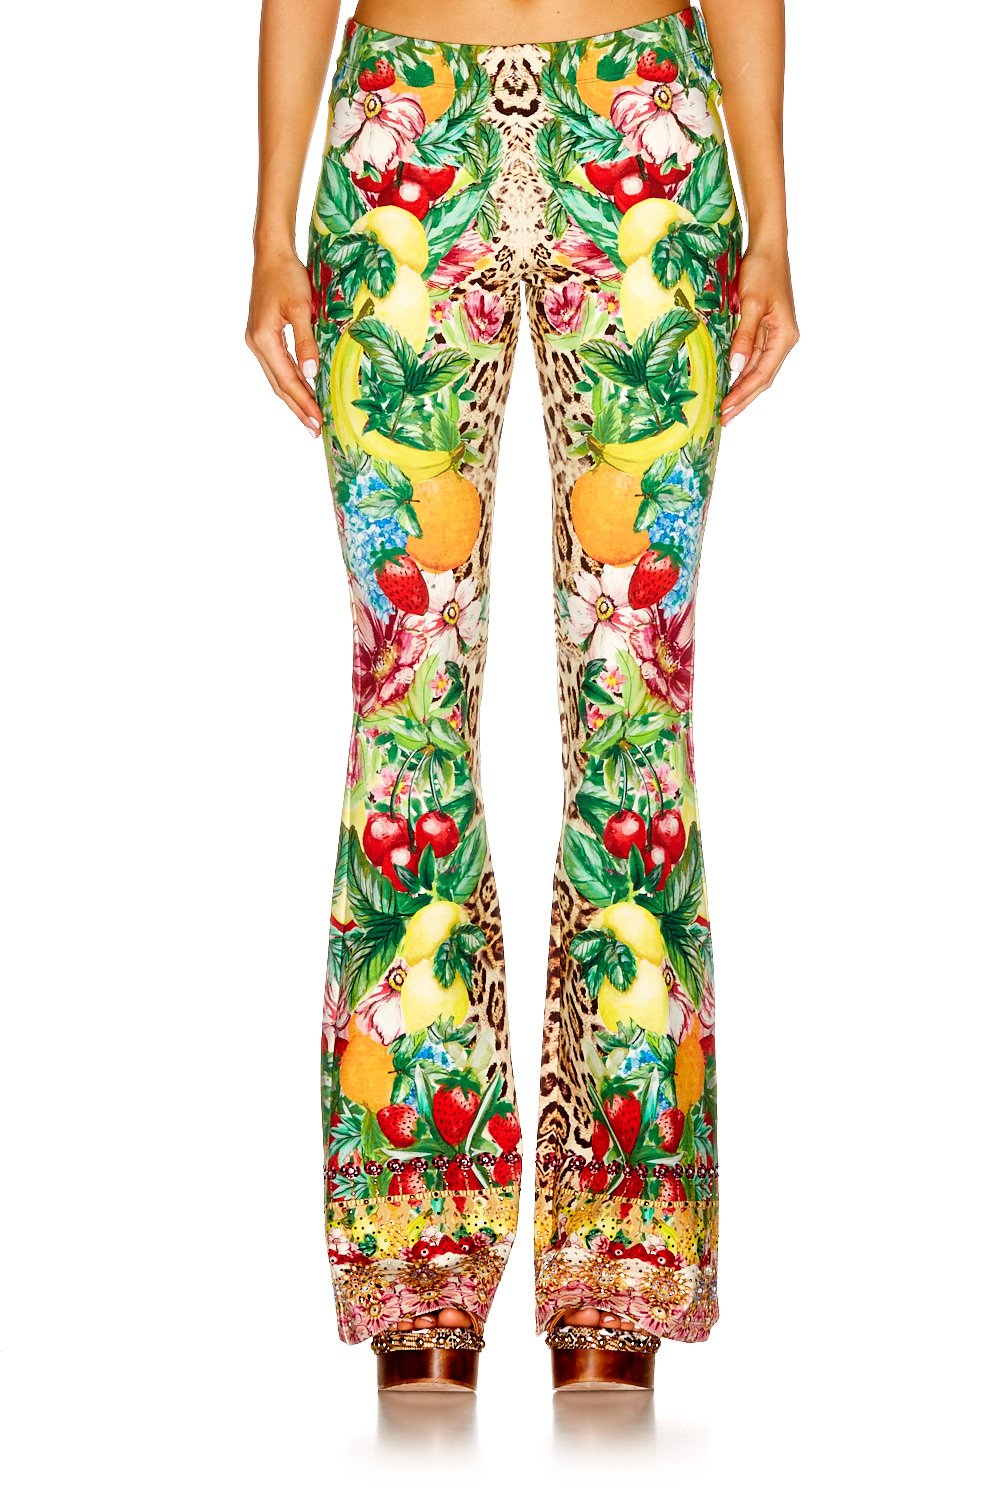 COOL CAT HIGH WAISTED FLARED TROUSER